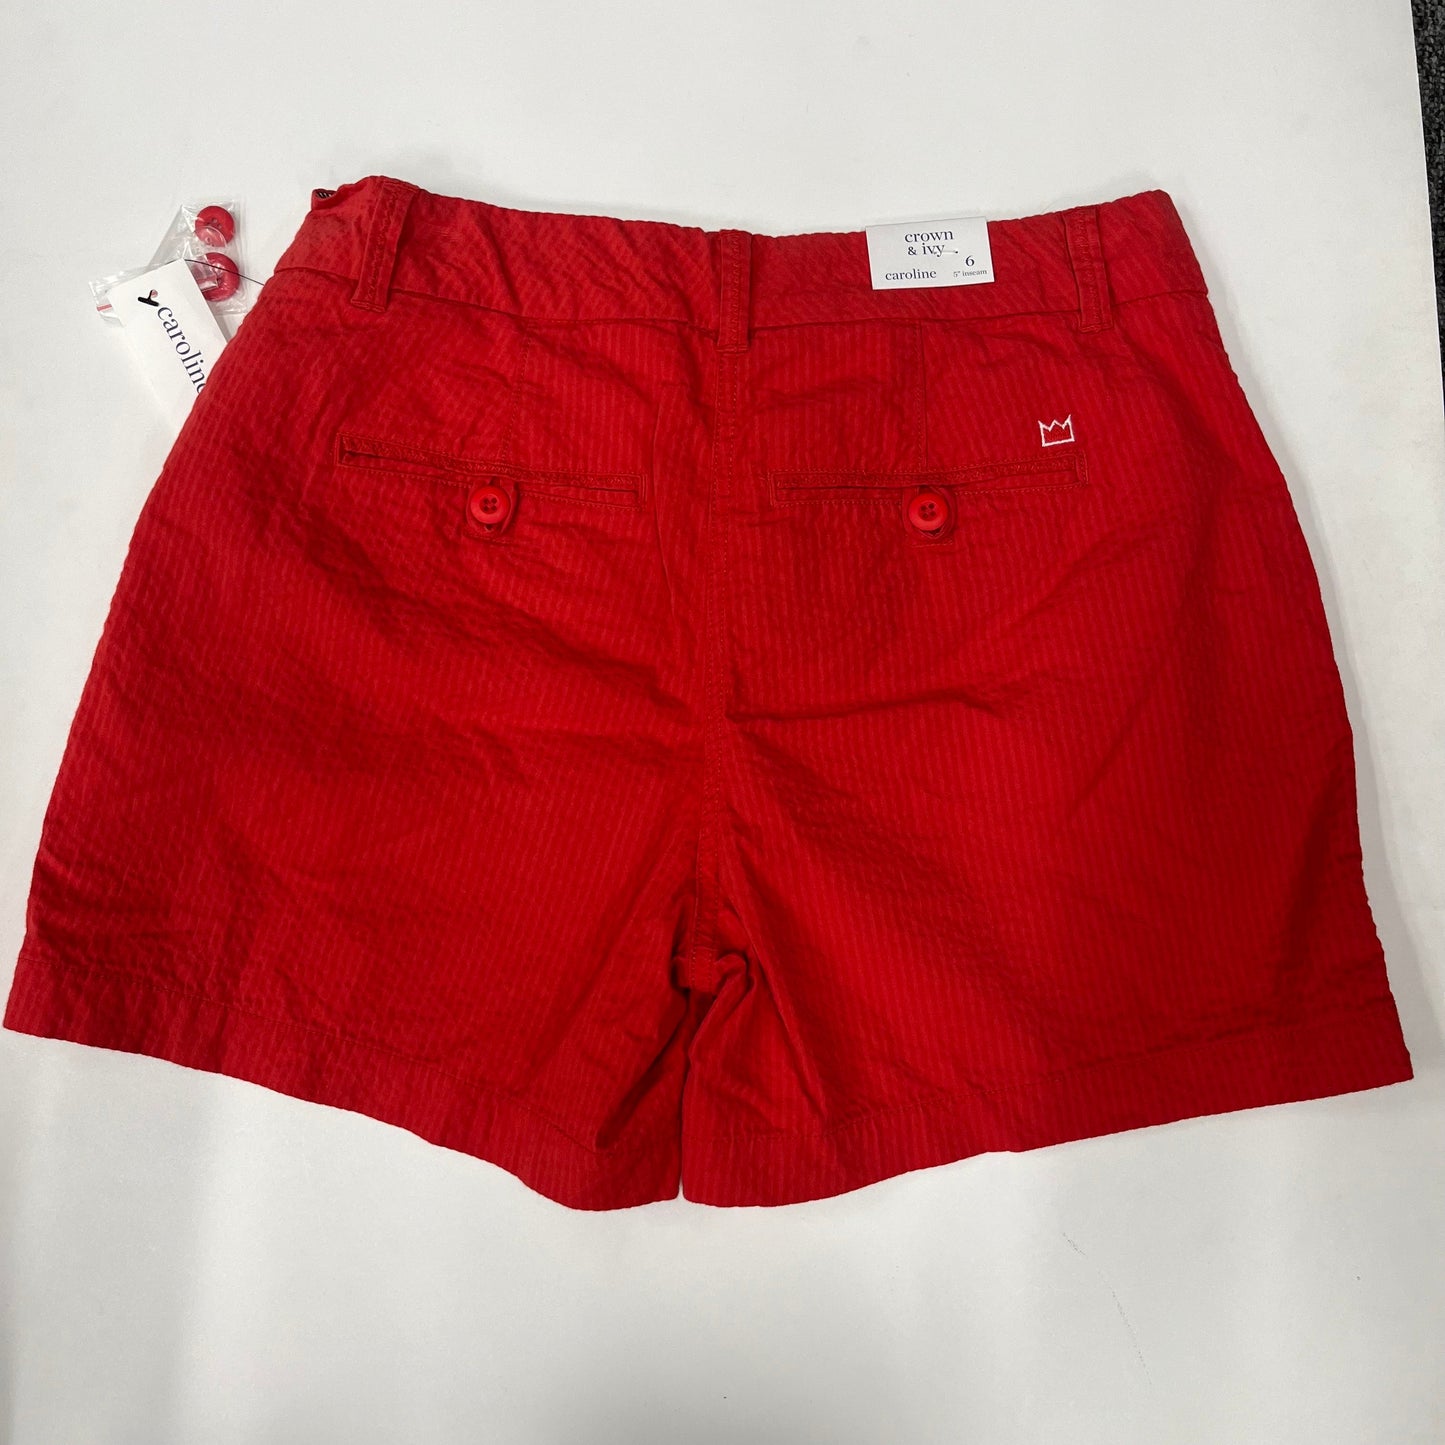 Shorts By Crown And Ivy NWT Size: 6